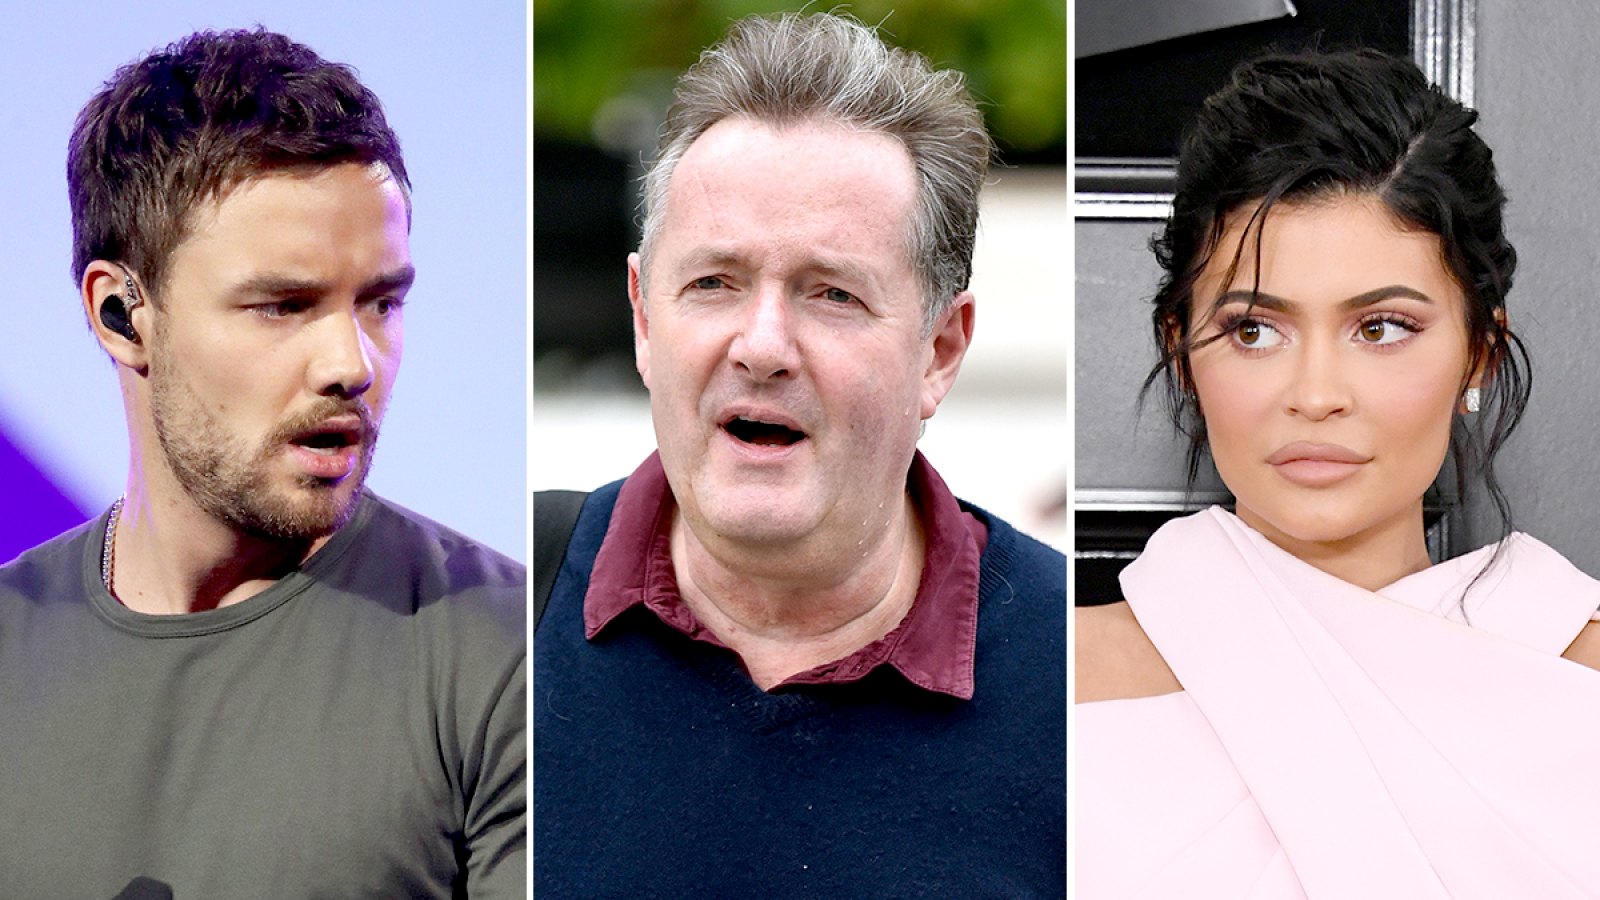 Liam-Payne-and-Piers-Morgan-Get-Into-Twitter-Feud-Over-Kylie-Jenner